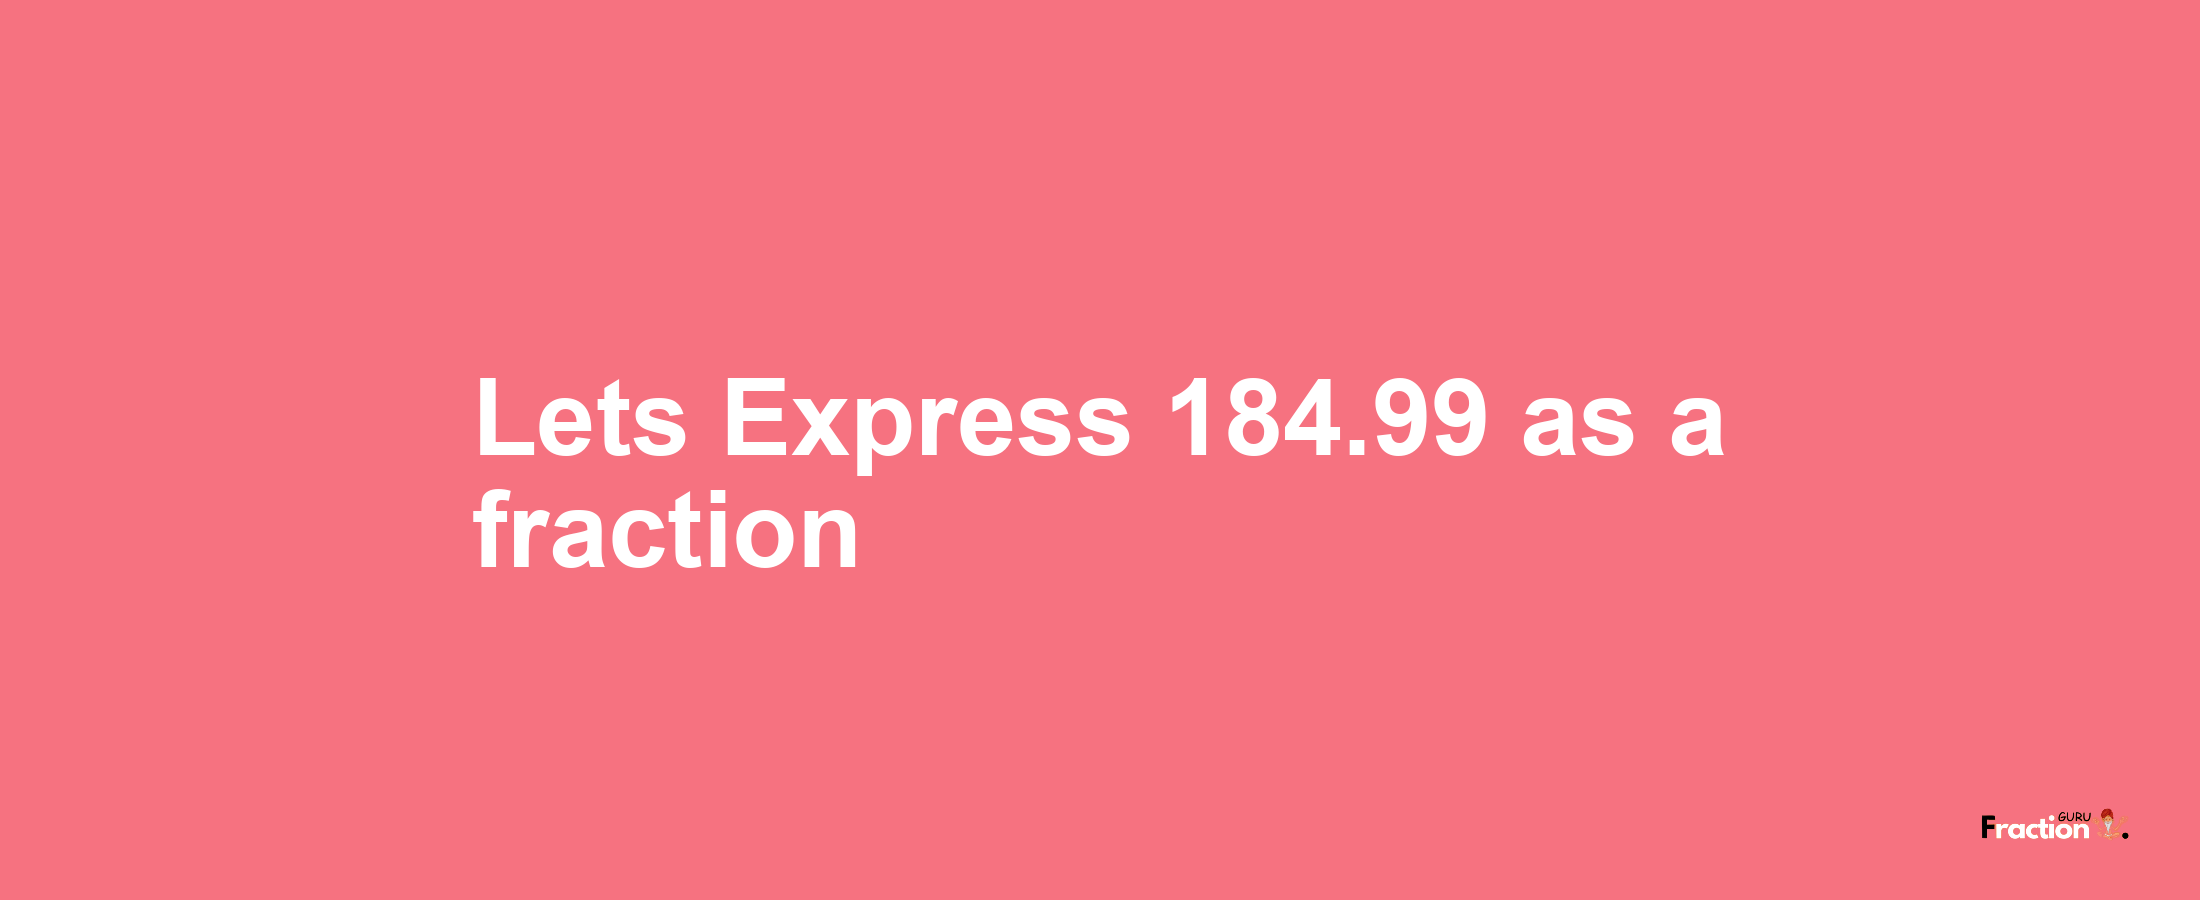 Lets Express 184.99 as afraction